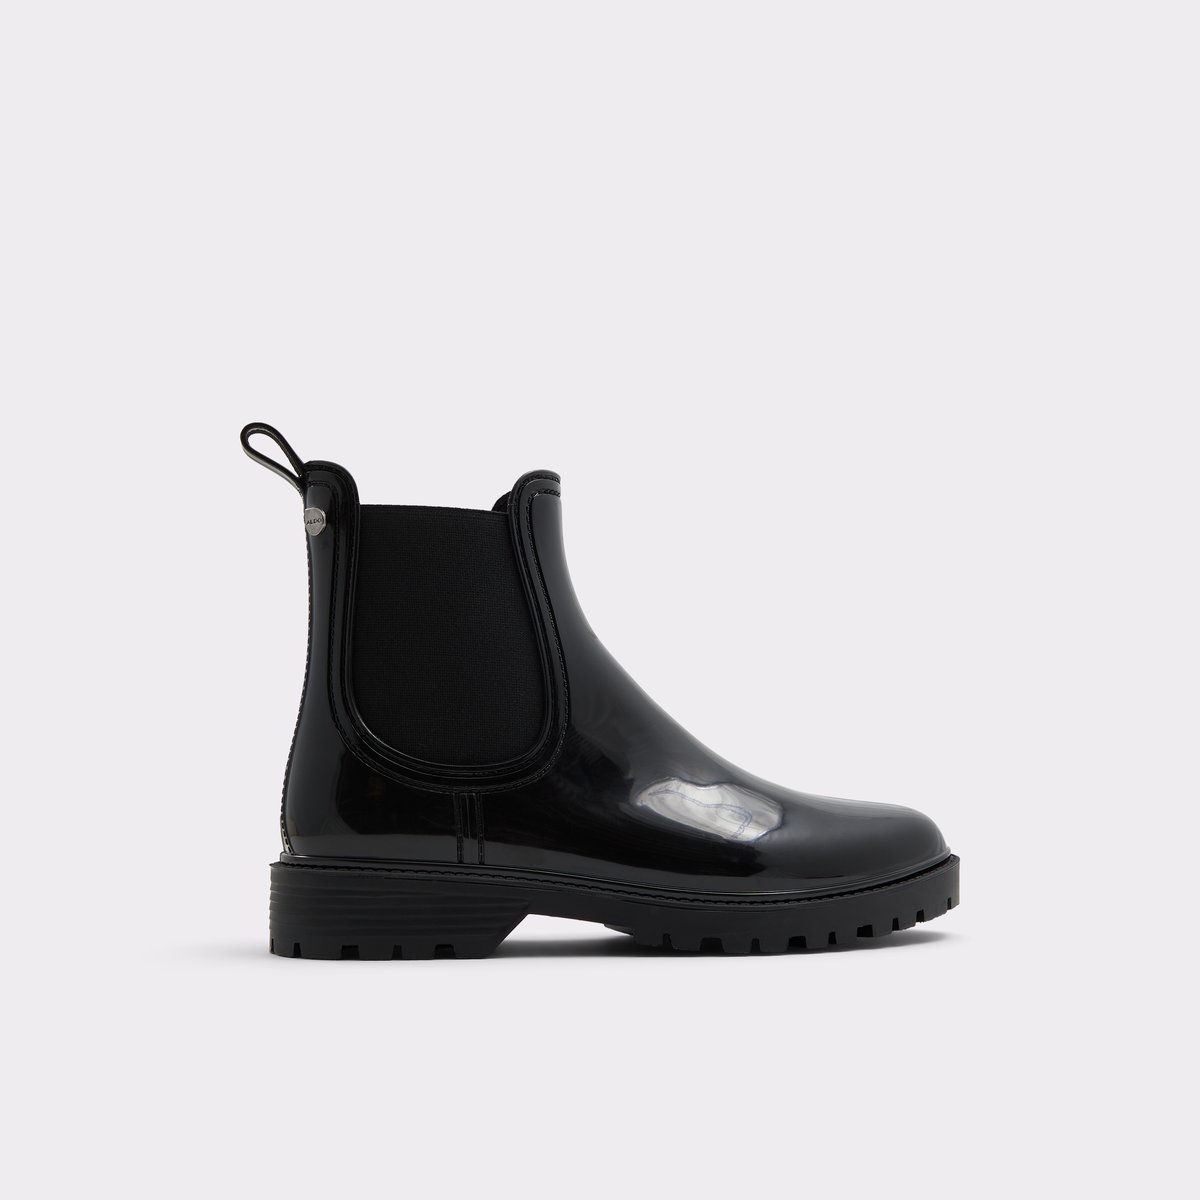 Storm Other Black Synthetic Shiny Women's Winter boots | ALDO Canada